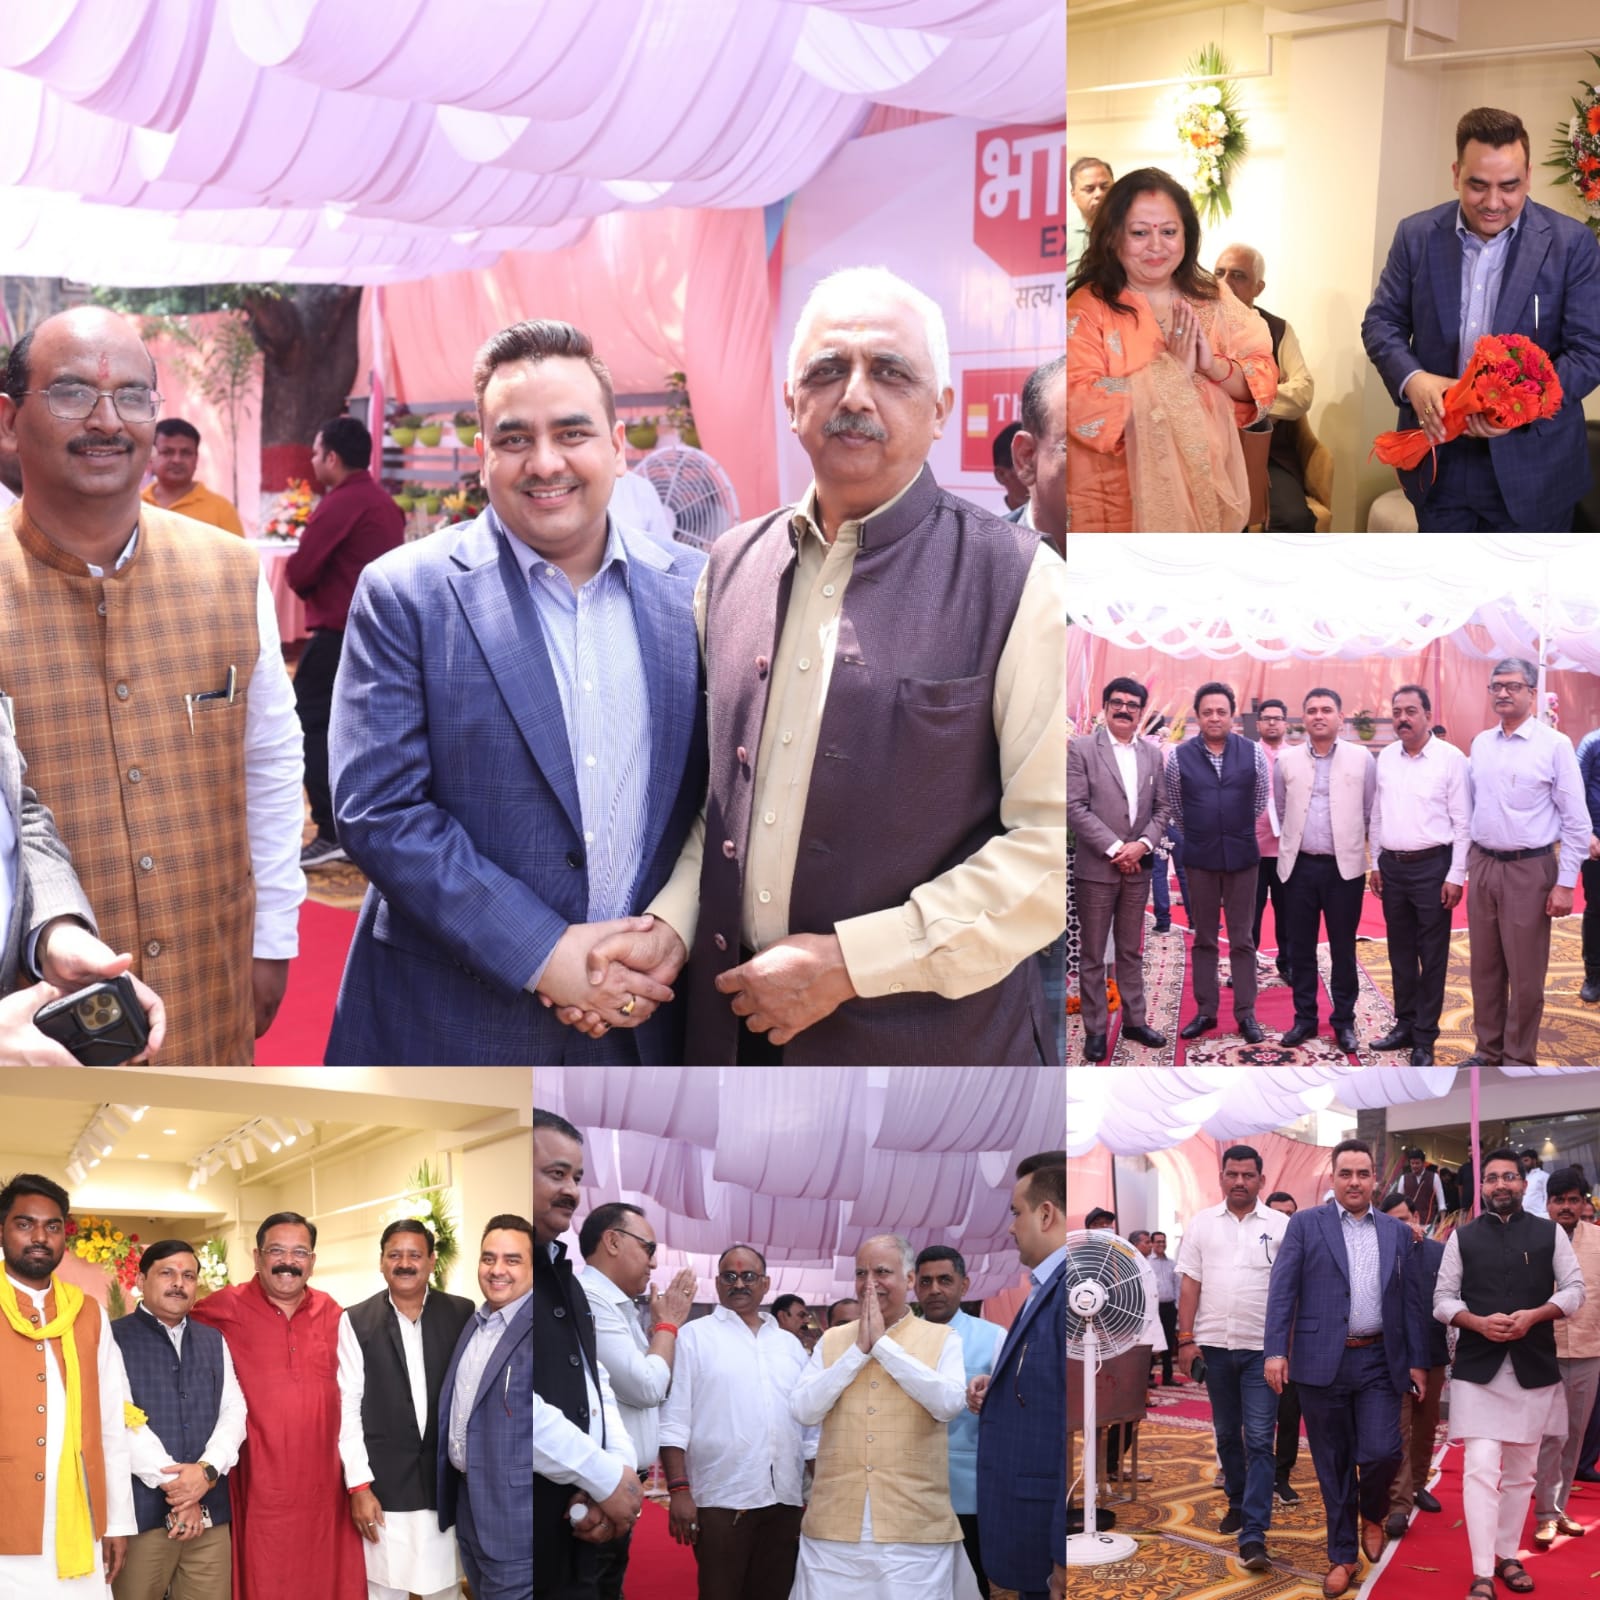 Bharat Express’ Lucknow Bureau Inauguration: BJP State President Bhupendra Singh Chaudhary, Juhie Singh And Others Graced The Event And Extended Best Wishes